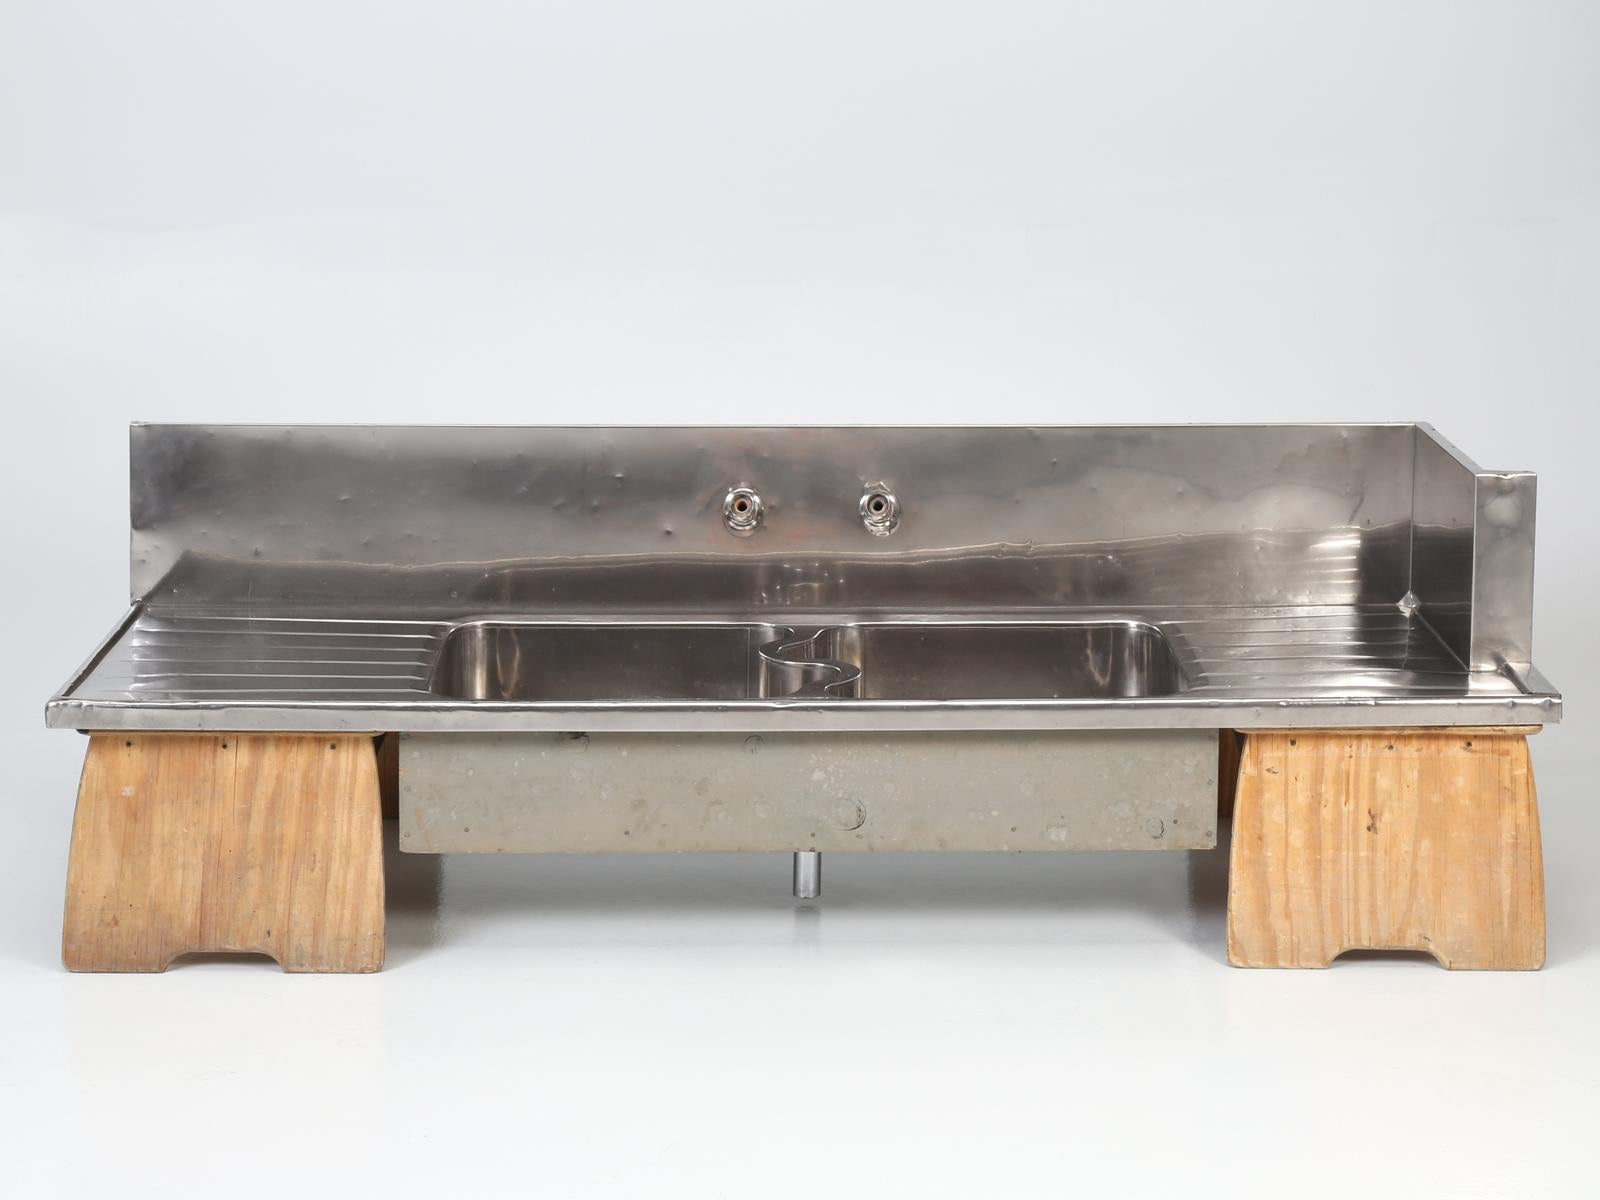 German silver sinks were first introduced in Chicago by Leopold & Louis Katz along with Ellef Robarth, a Tinsmith who came up with a concept to fabricate the German silver sinks and deliver them locally here in Chicago. Katz and Robarth formed the